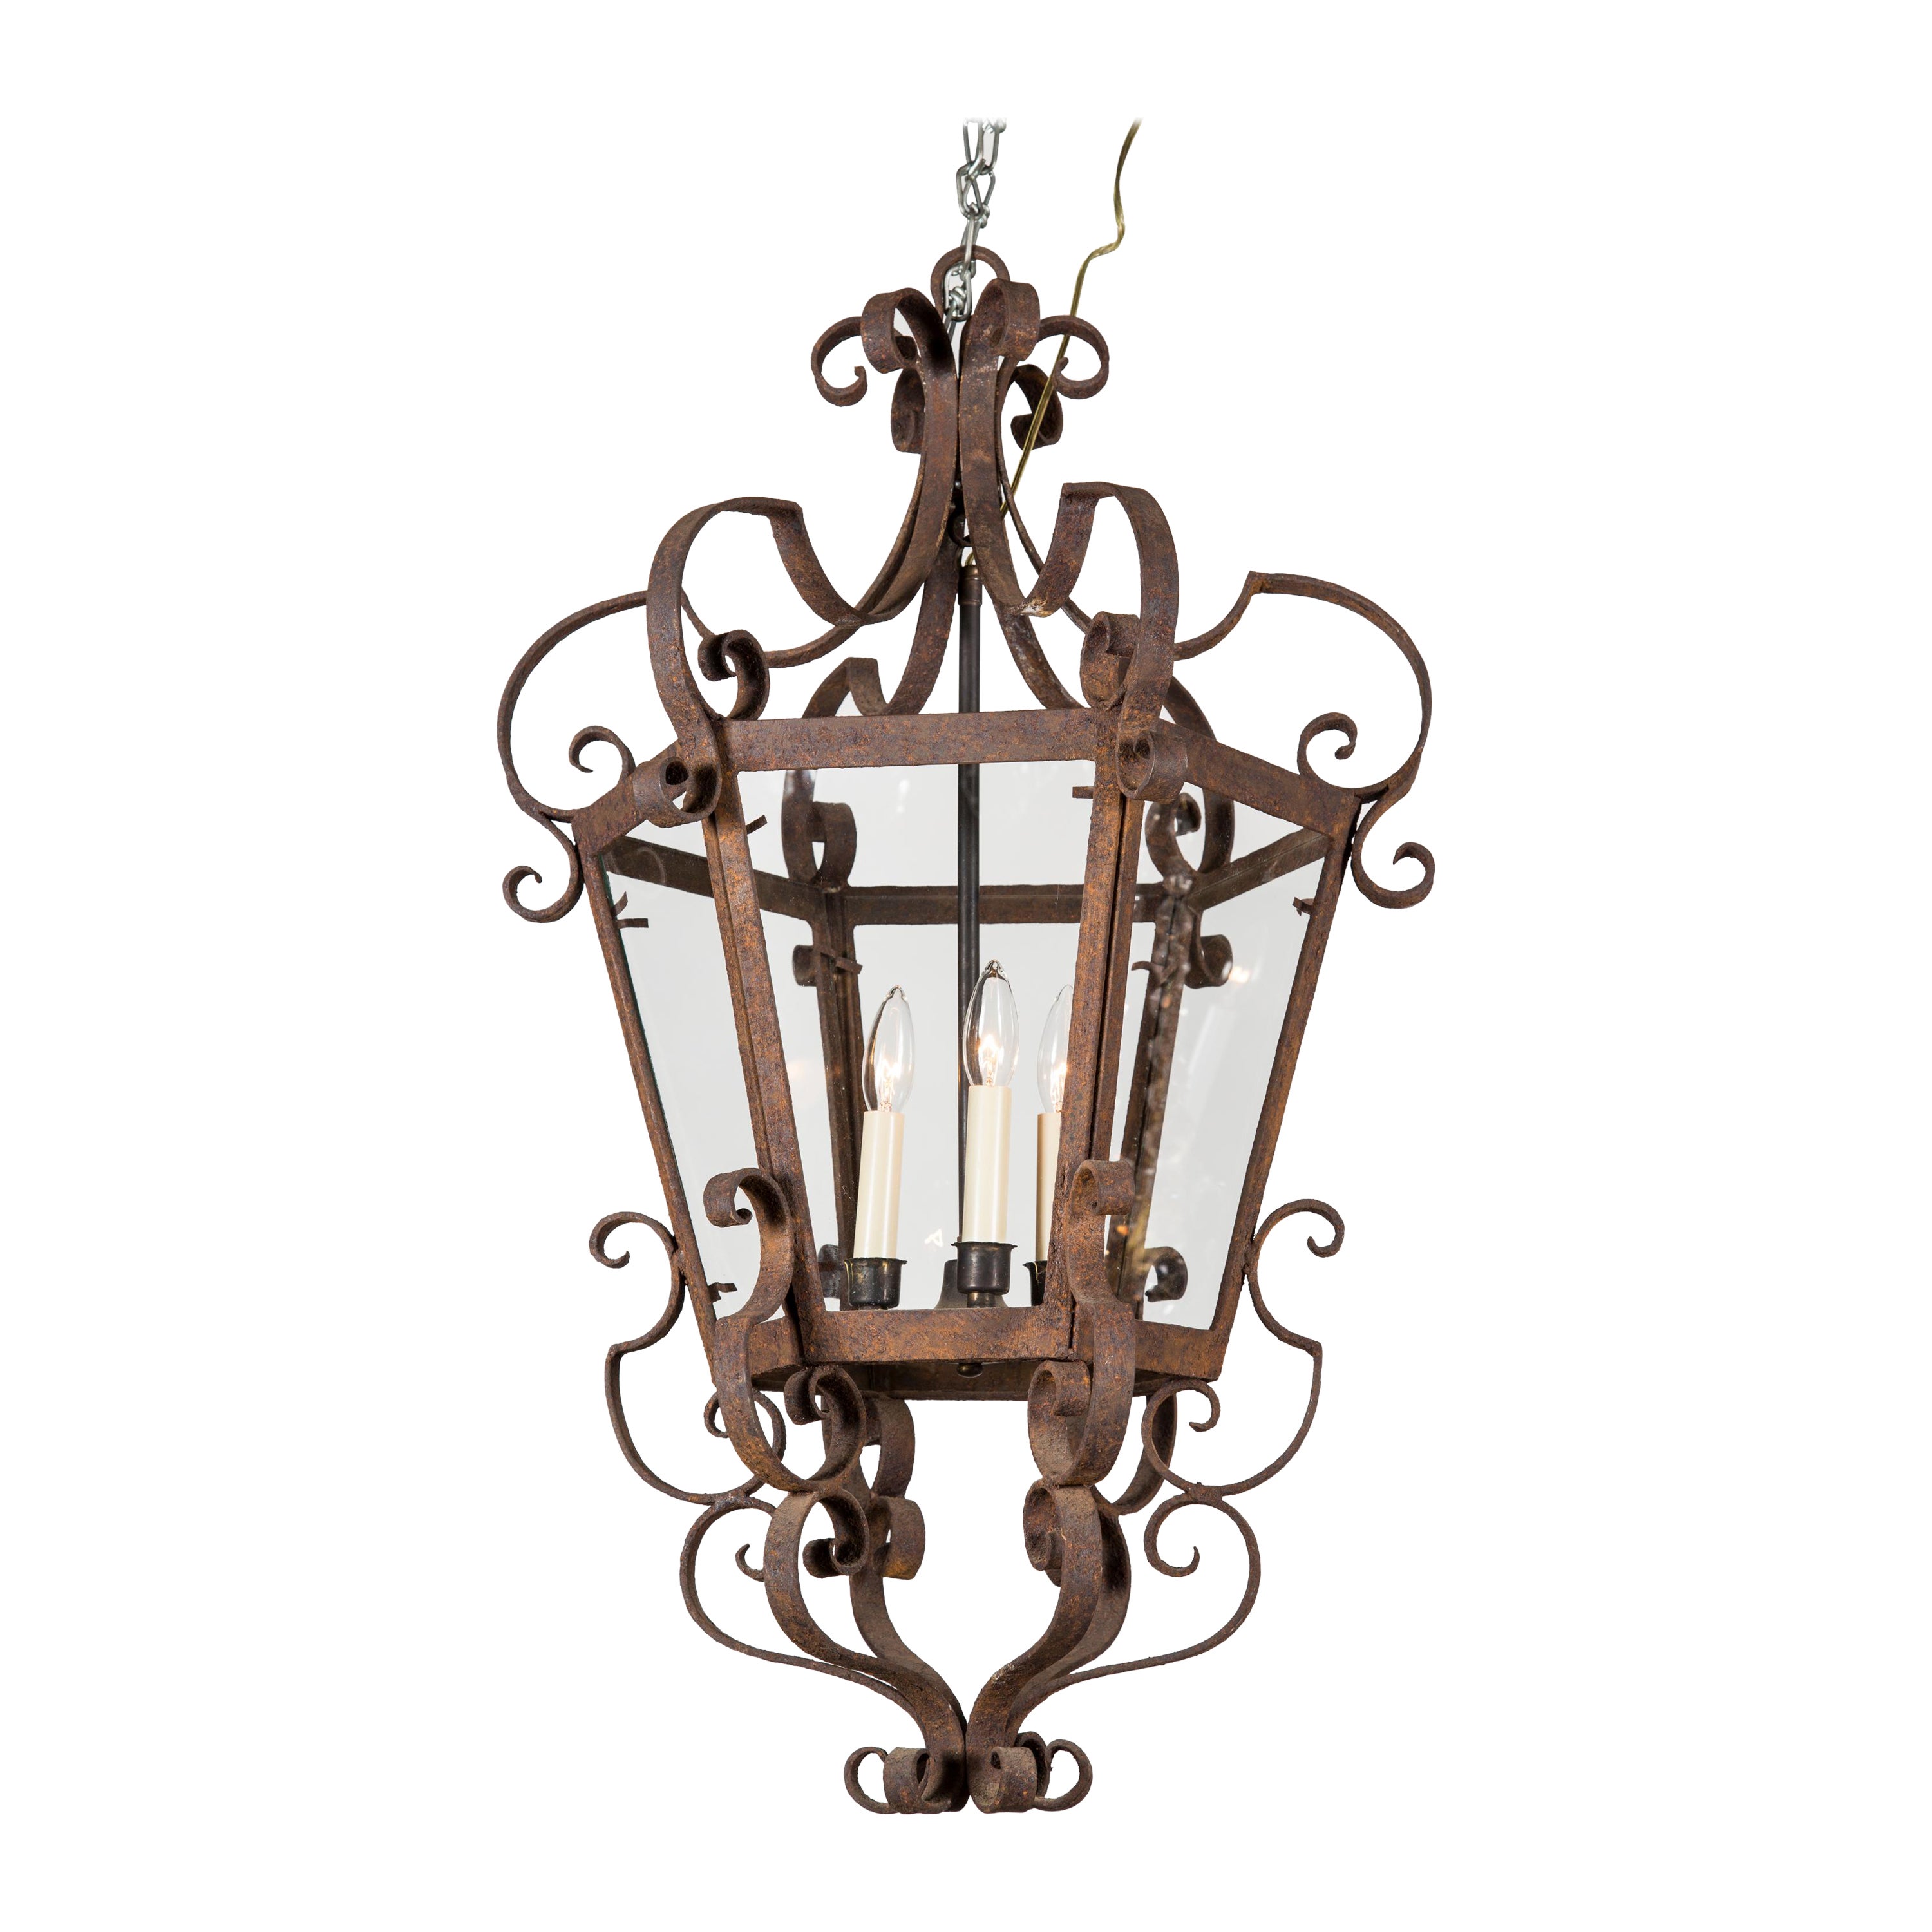 French Hexagonal Wrought Iron Hanging Lantern, 19th Century For Sale